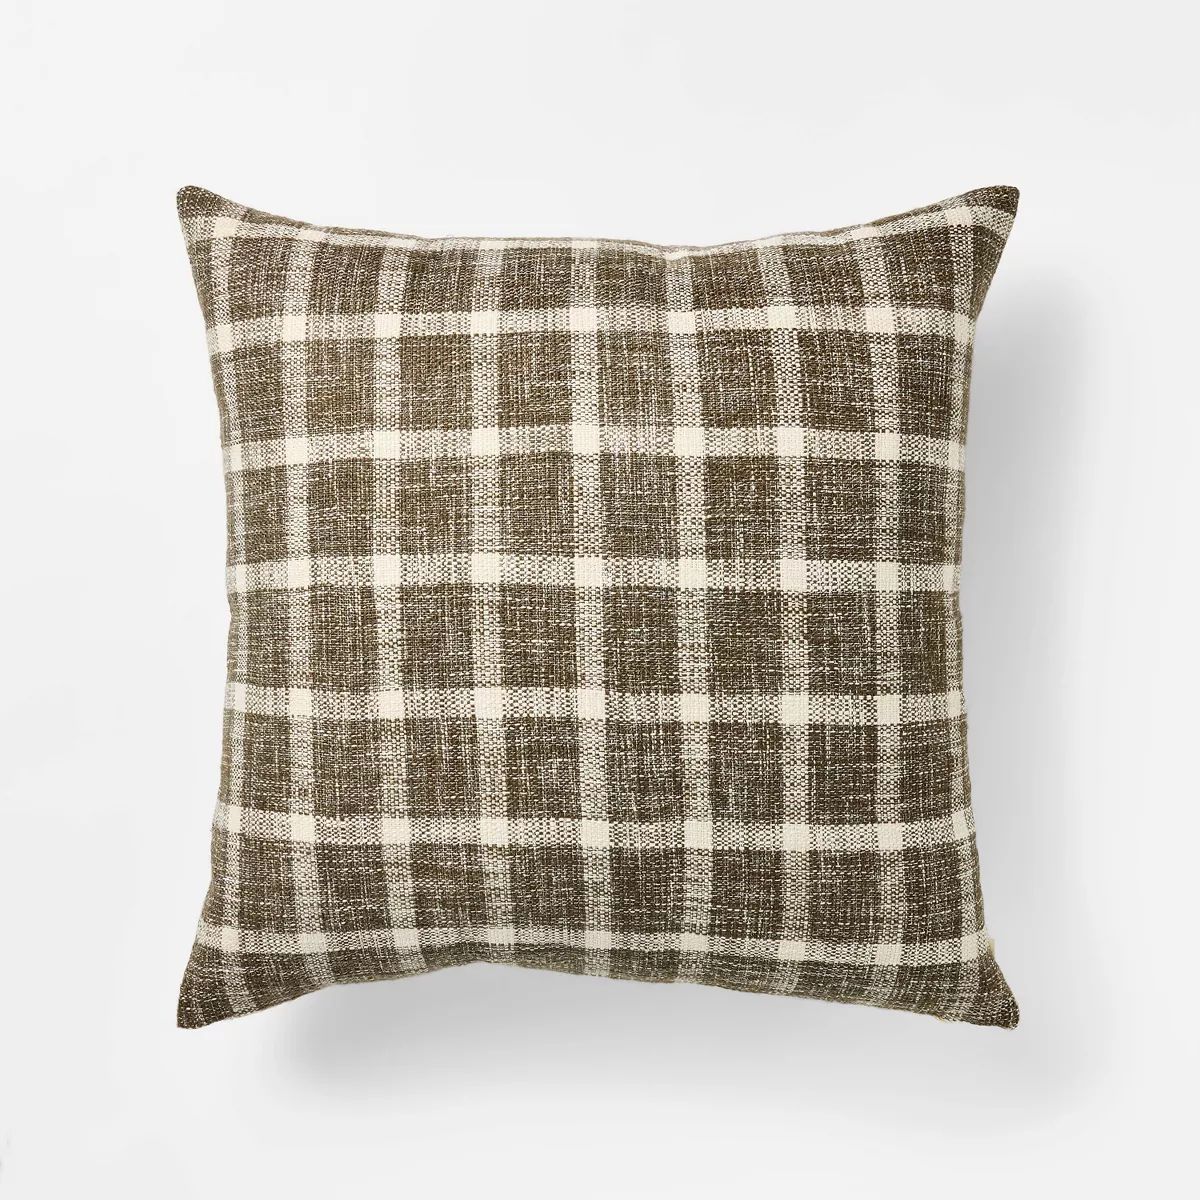 Oversized Woven Plaid Square Throw Pillow - Threshold™ designed with Studio McGee | Target